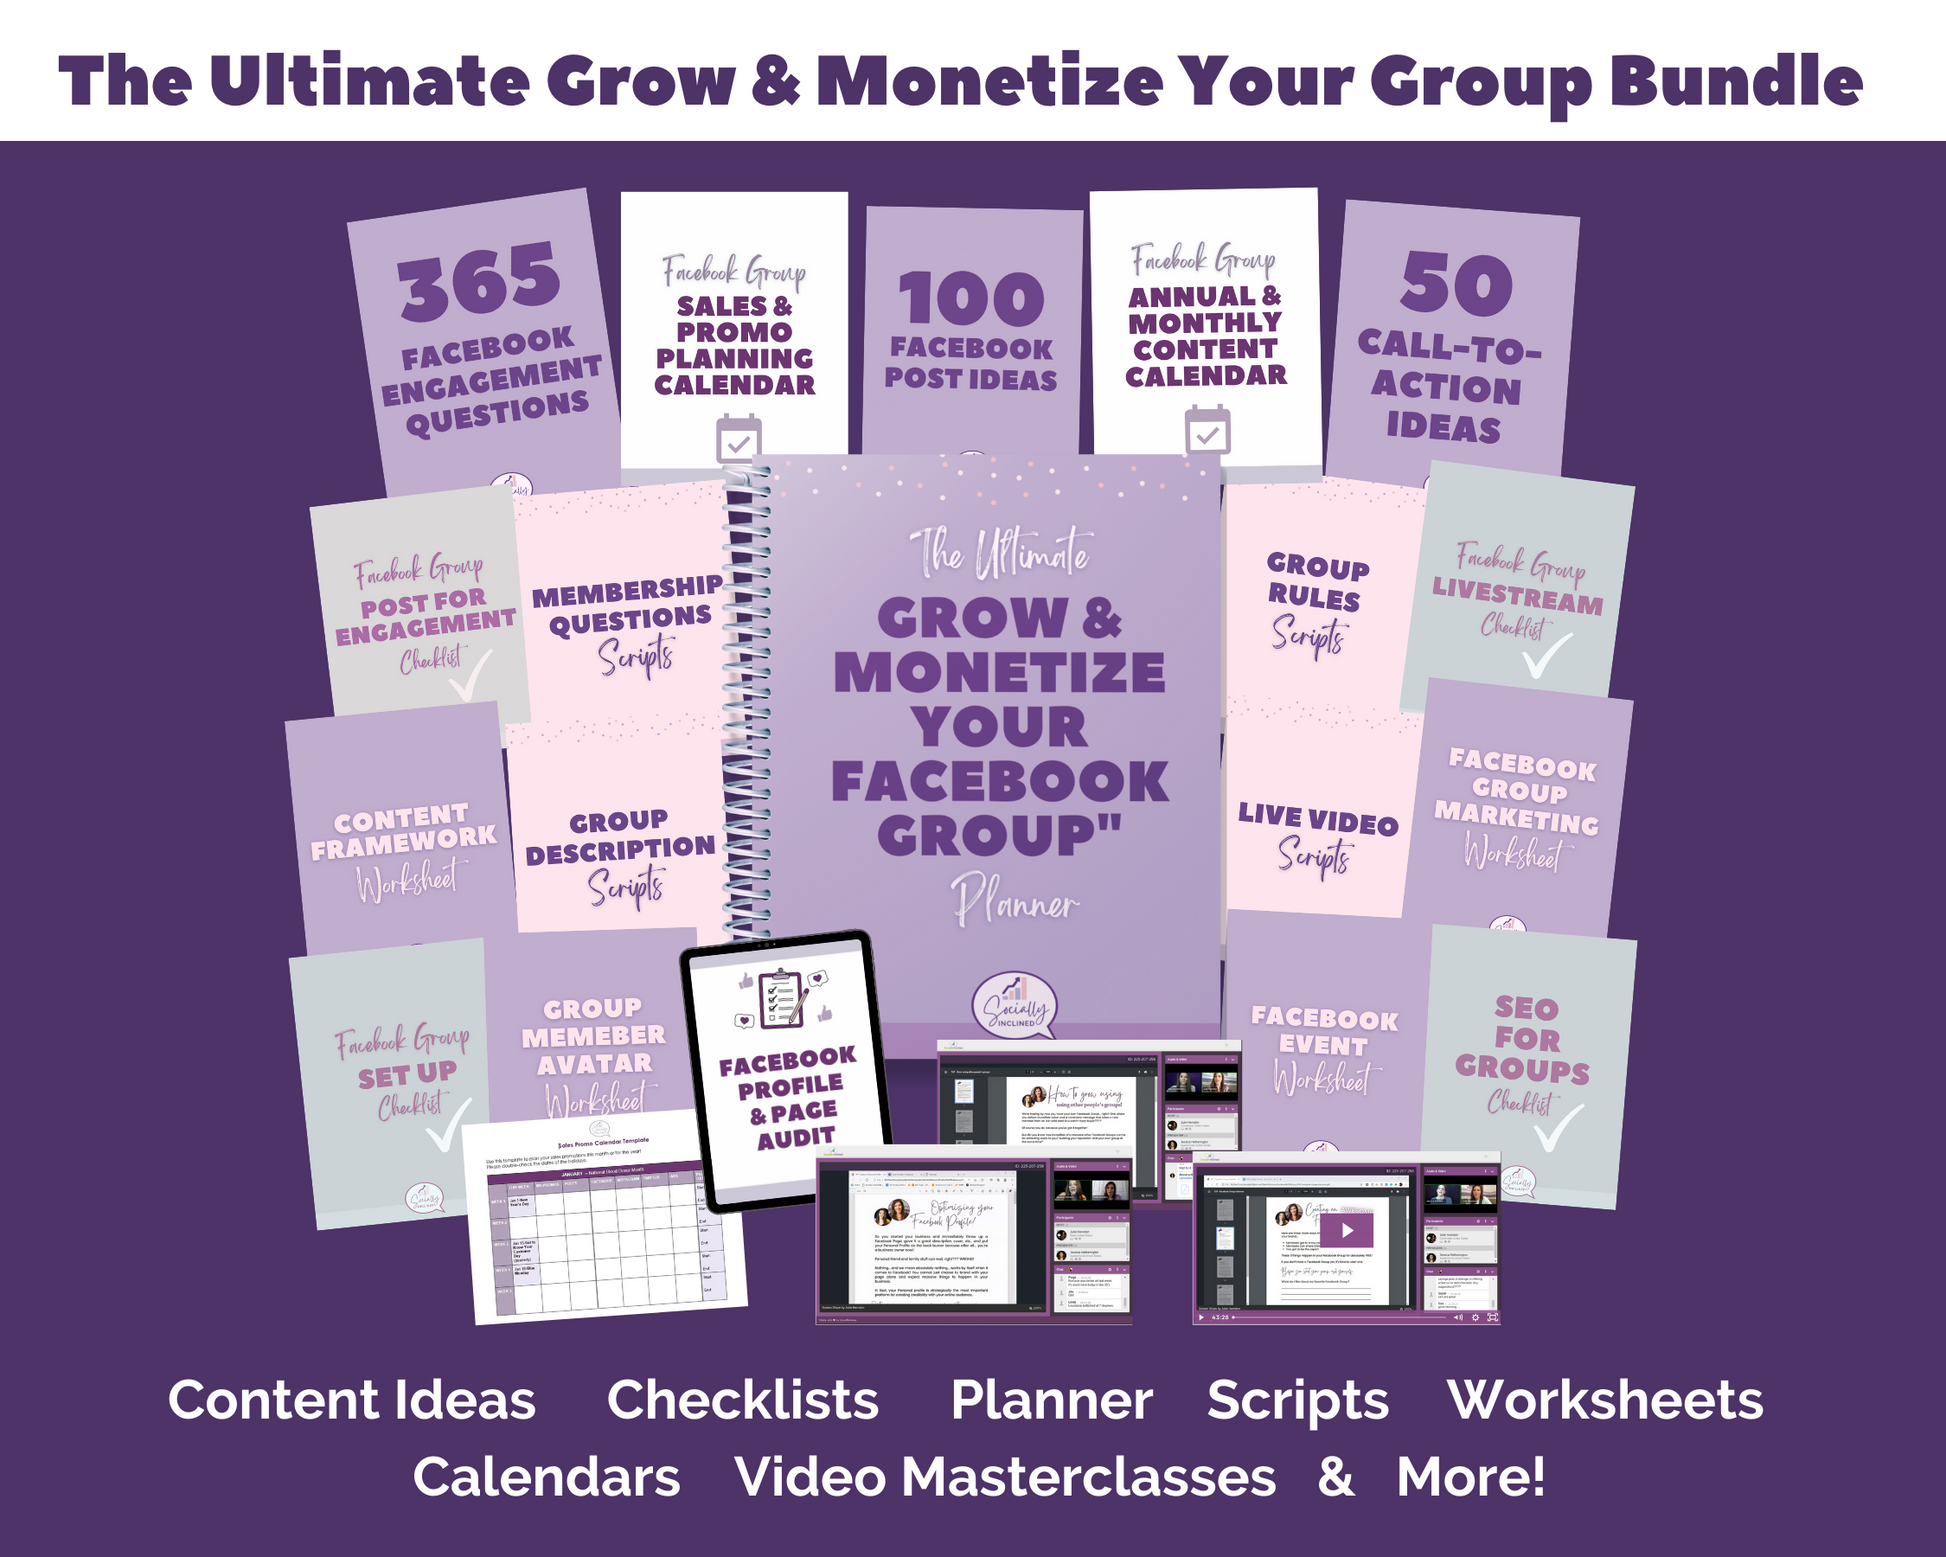 The ULTIMATE Grow & Monetize Your Facebook Group Bundle by Get Socially Inclined for growth and monetization.